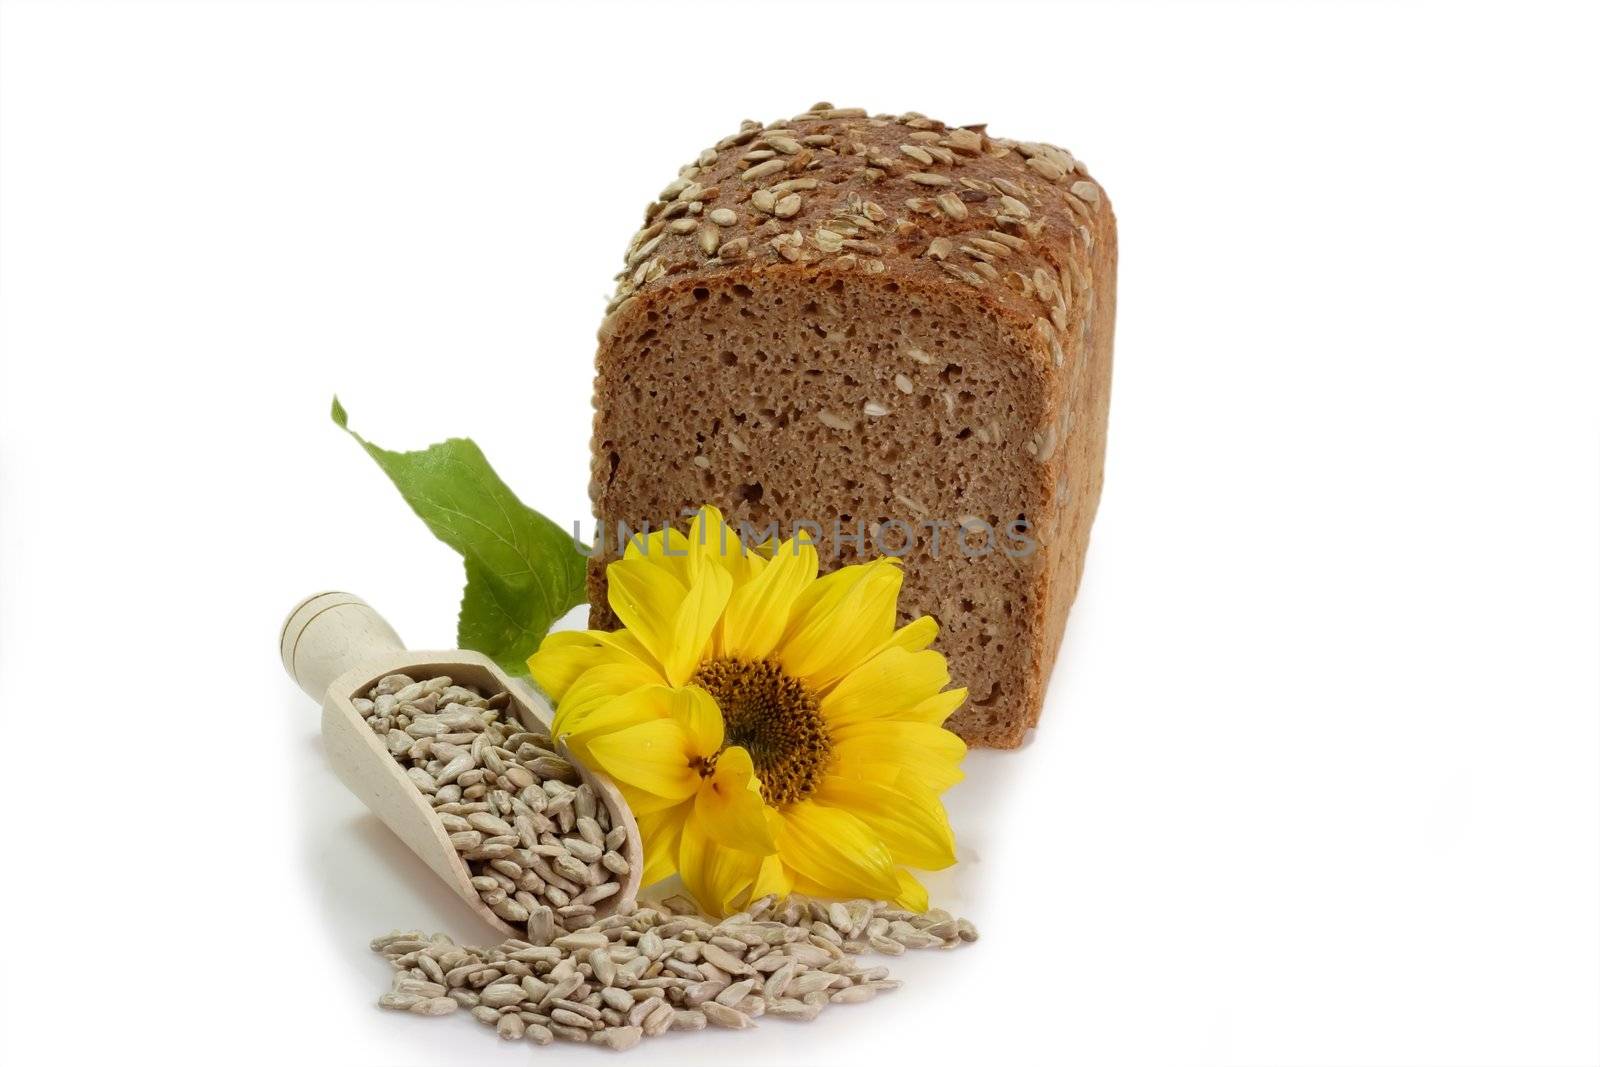 Whole multi-grain-bread with sunflower seeds on white background